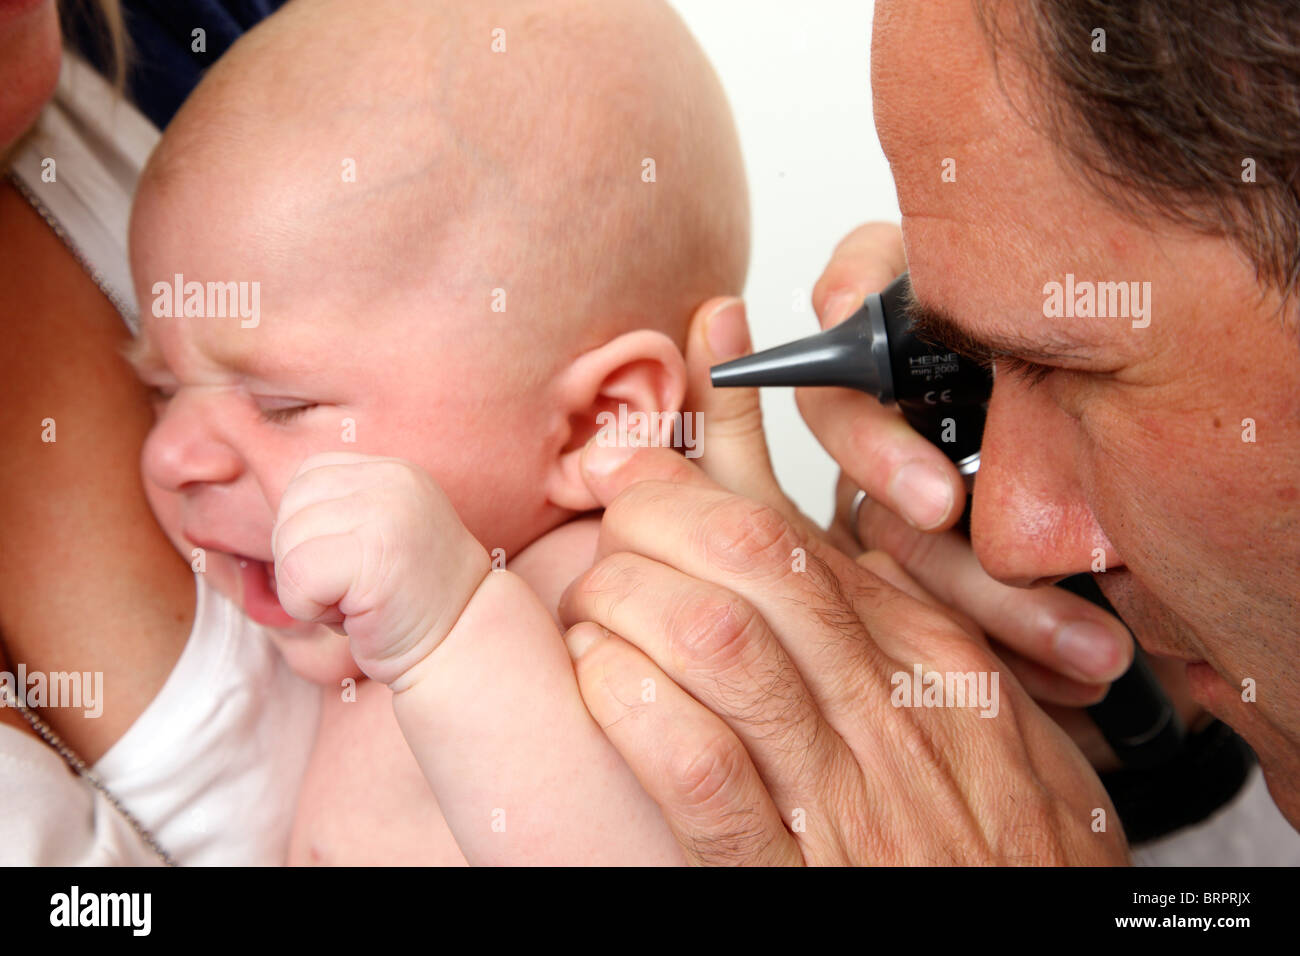 Doctor's surgery, paediatrician. Mother and baby. Medical examination of a 4 month old newborn. Checking the ear, auditory canal Stock Photo